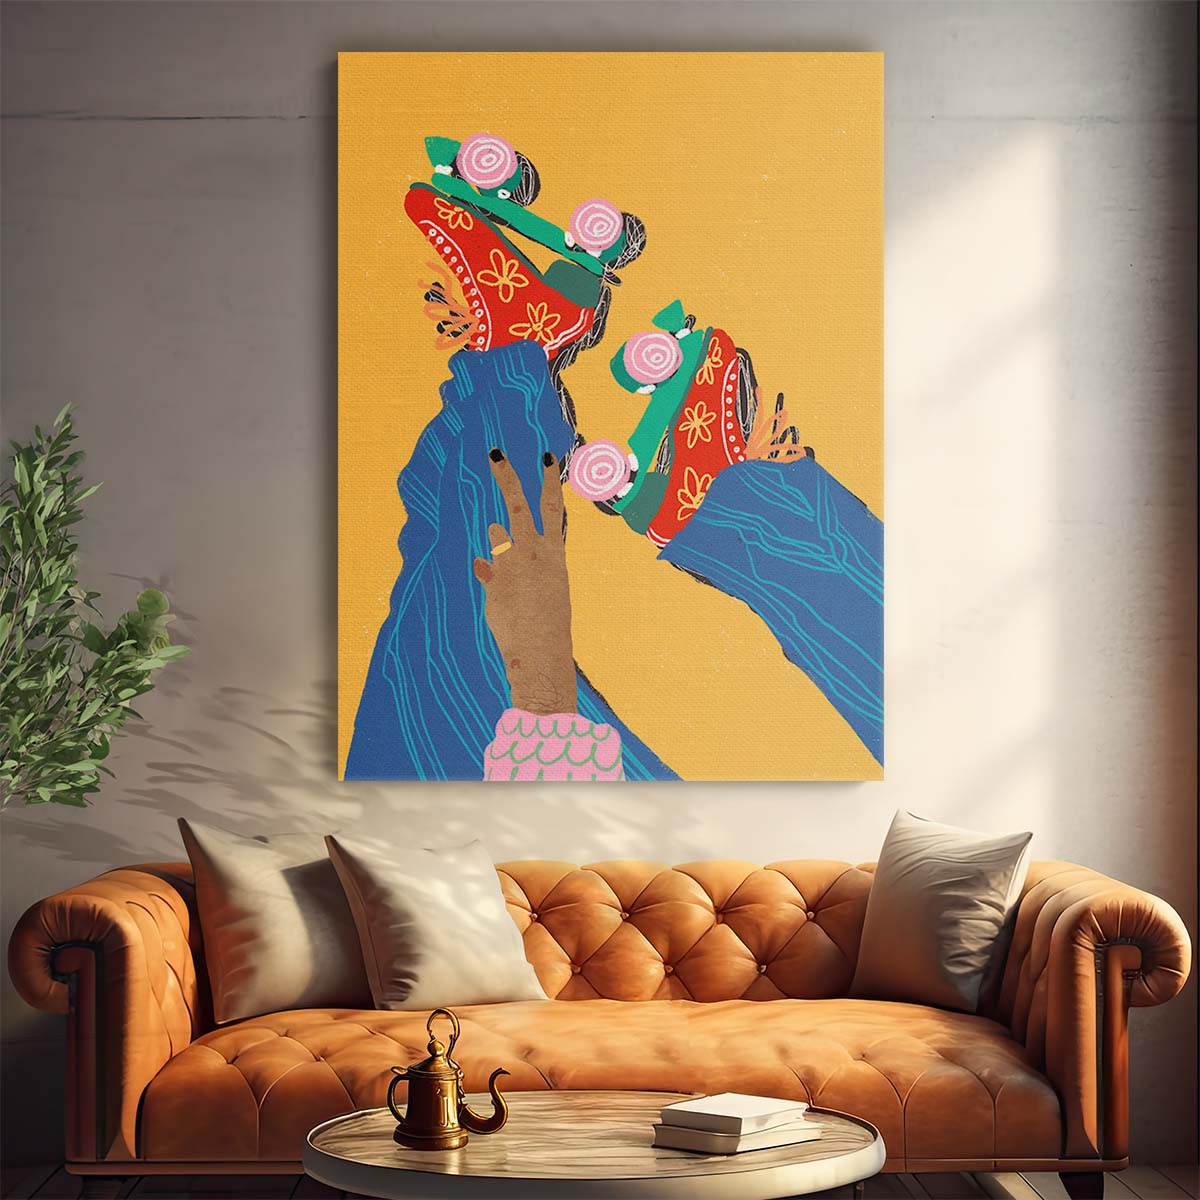 Vibrant Abstract Roller Skating Woman Illustration by Gigi Rosado by Luxuriance Designs, made in USA